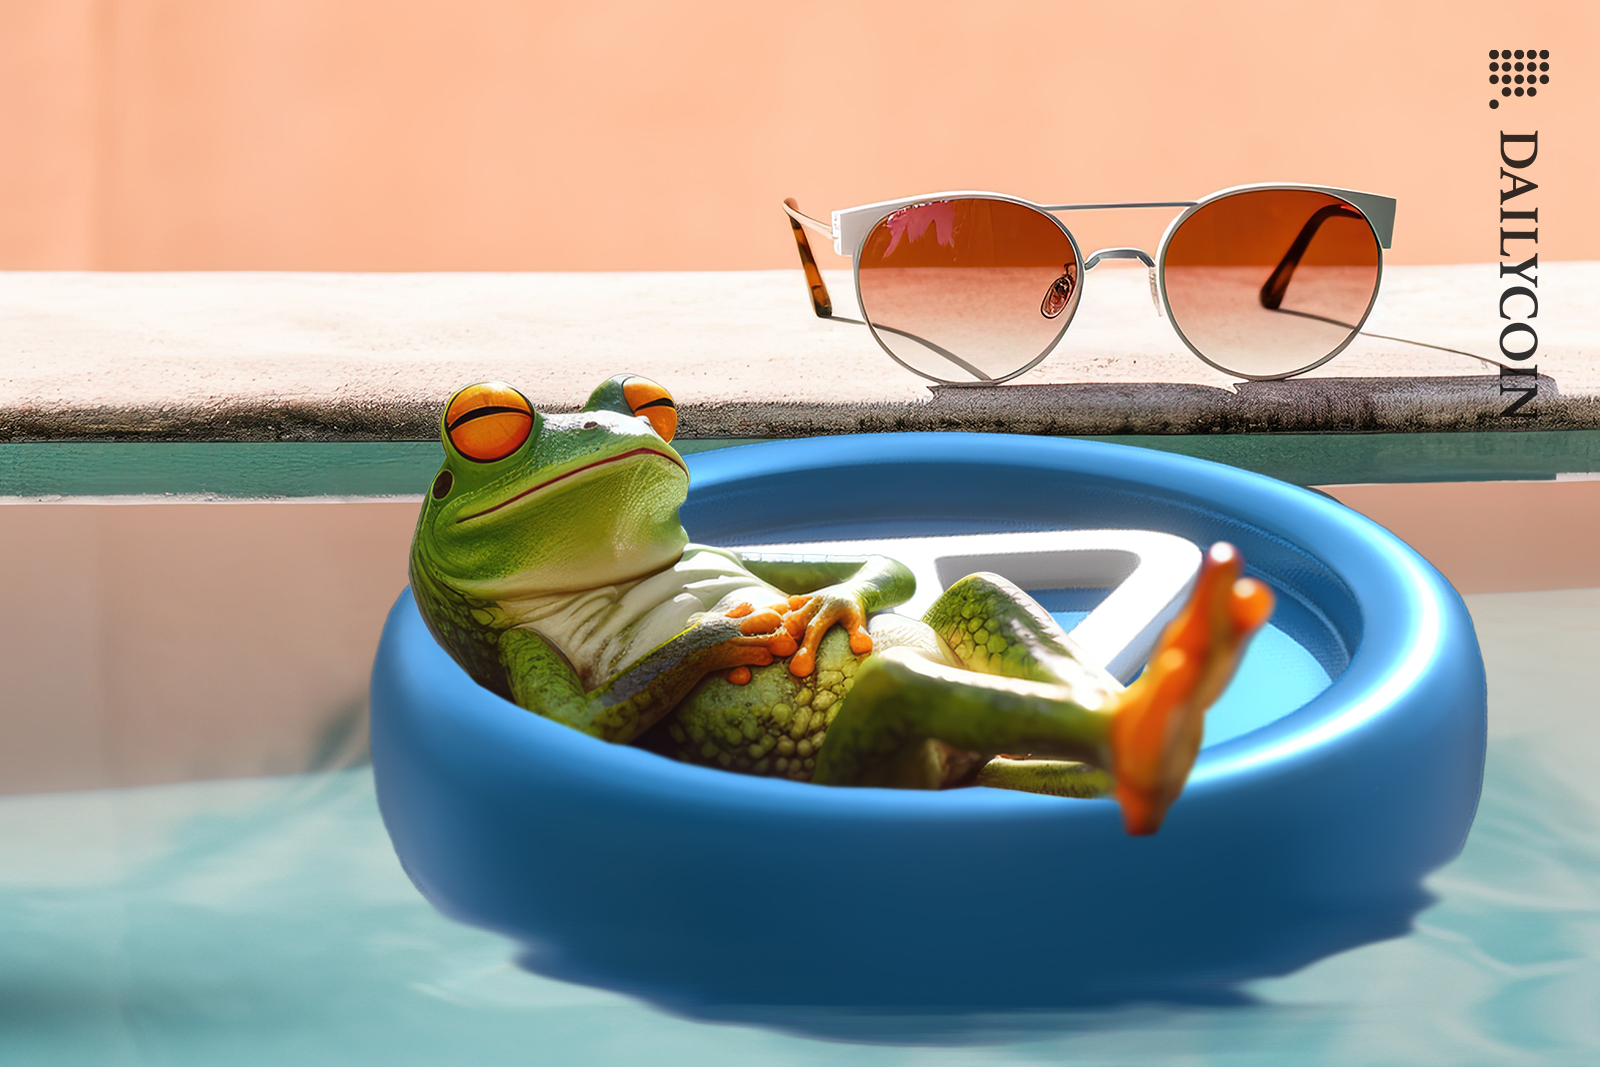 A Frog chilling in the pool on a floating Toncoin.